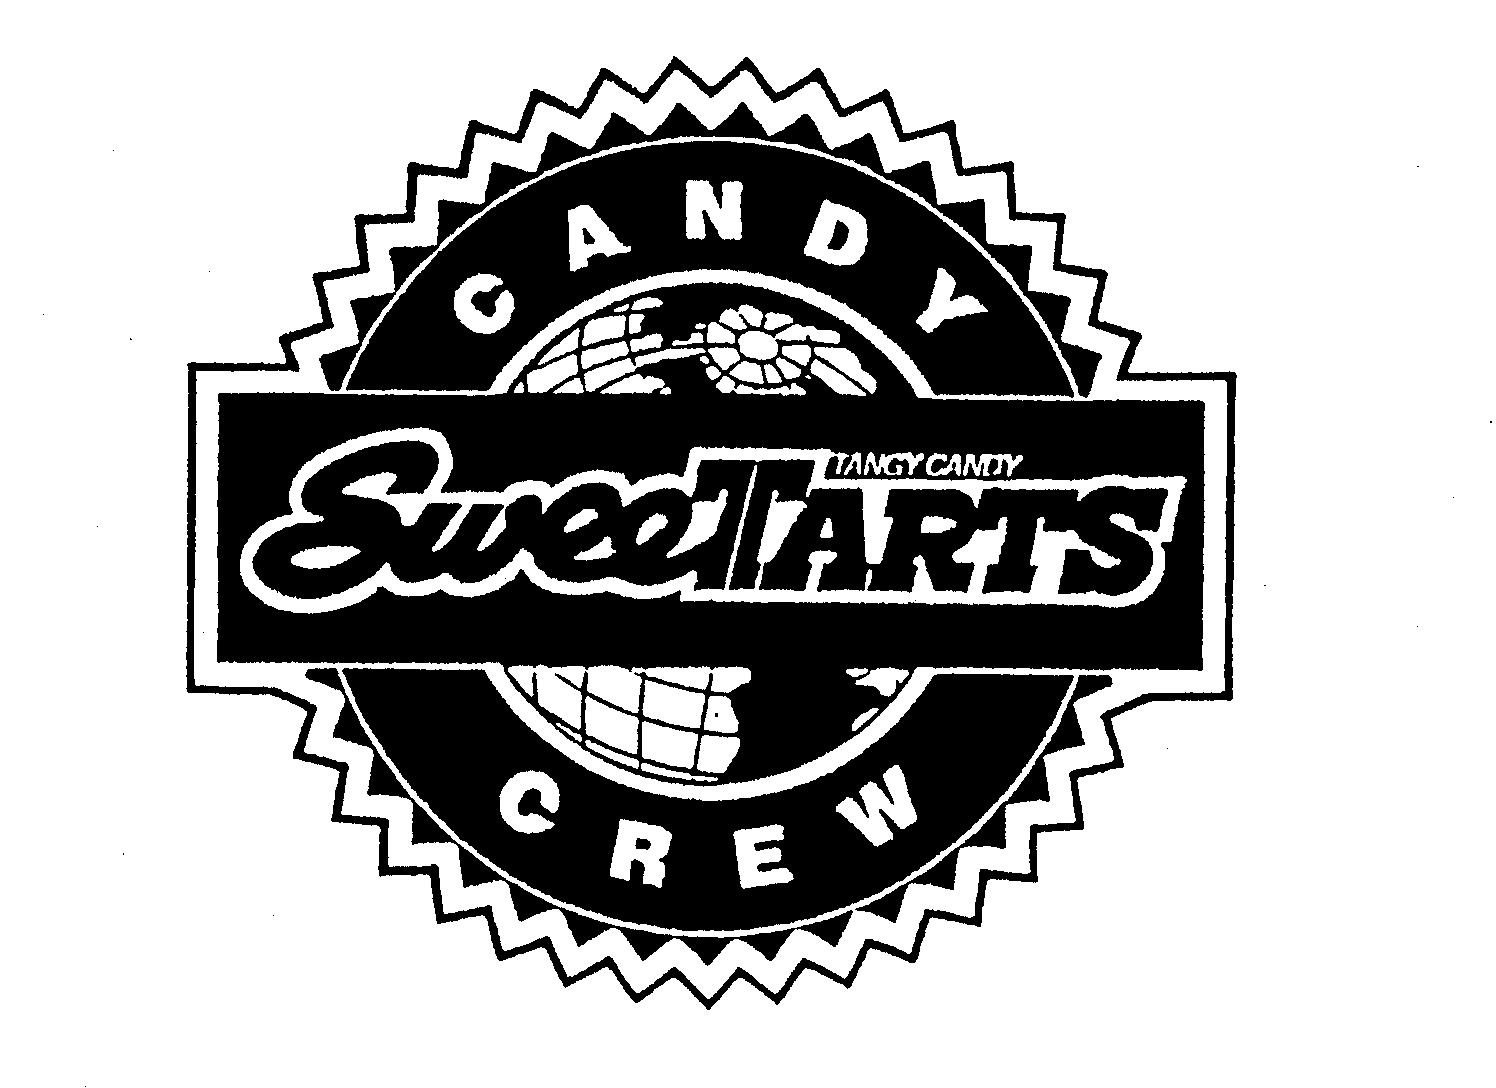  SWEETARTS CANDY CREW TANGY CANDY